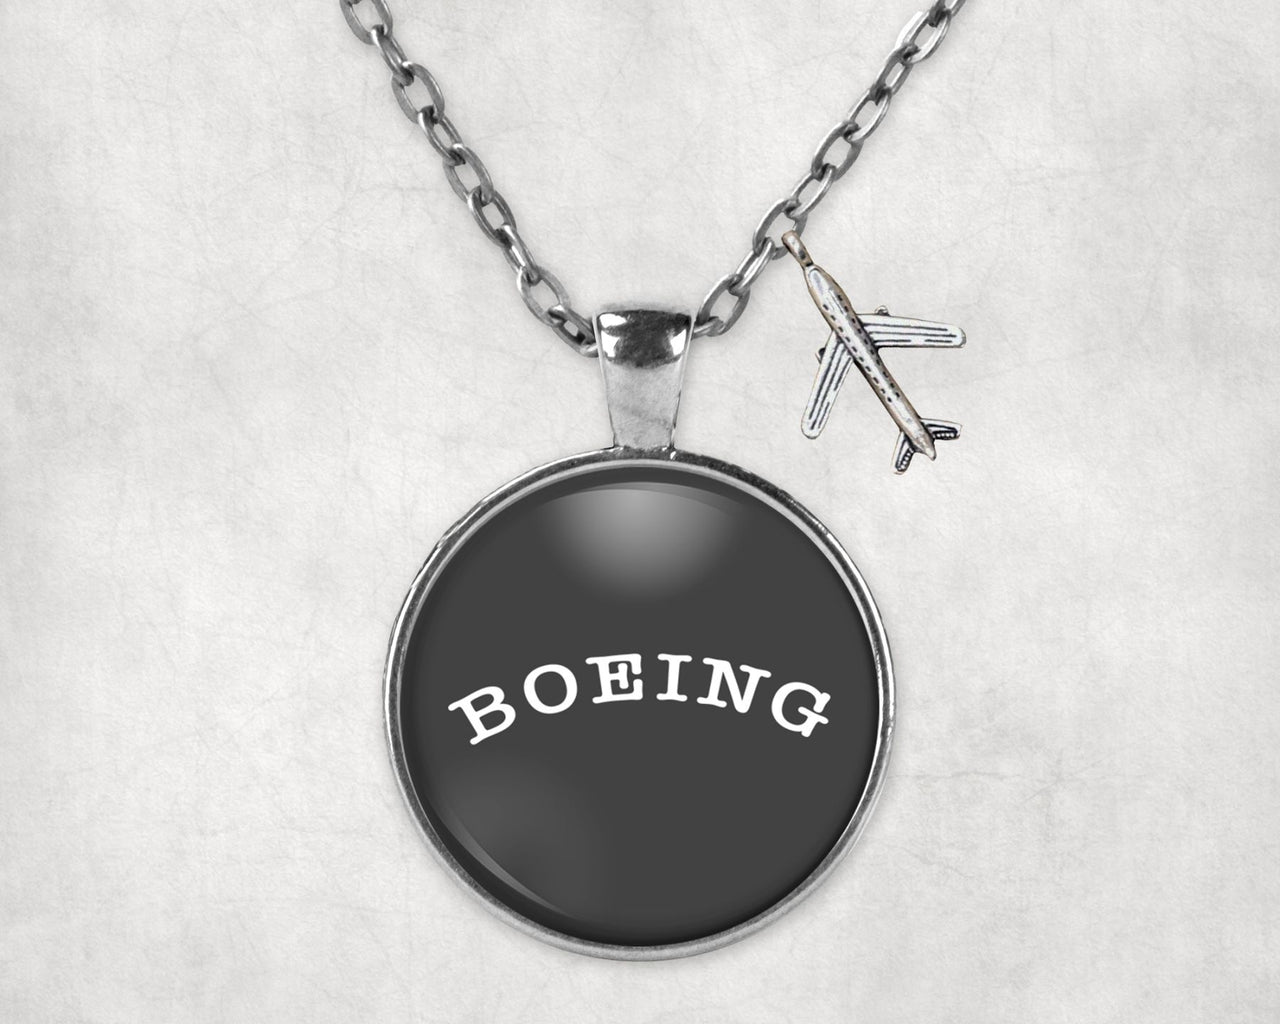 Special BOEING Text Designed Necklaces